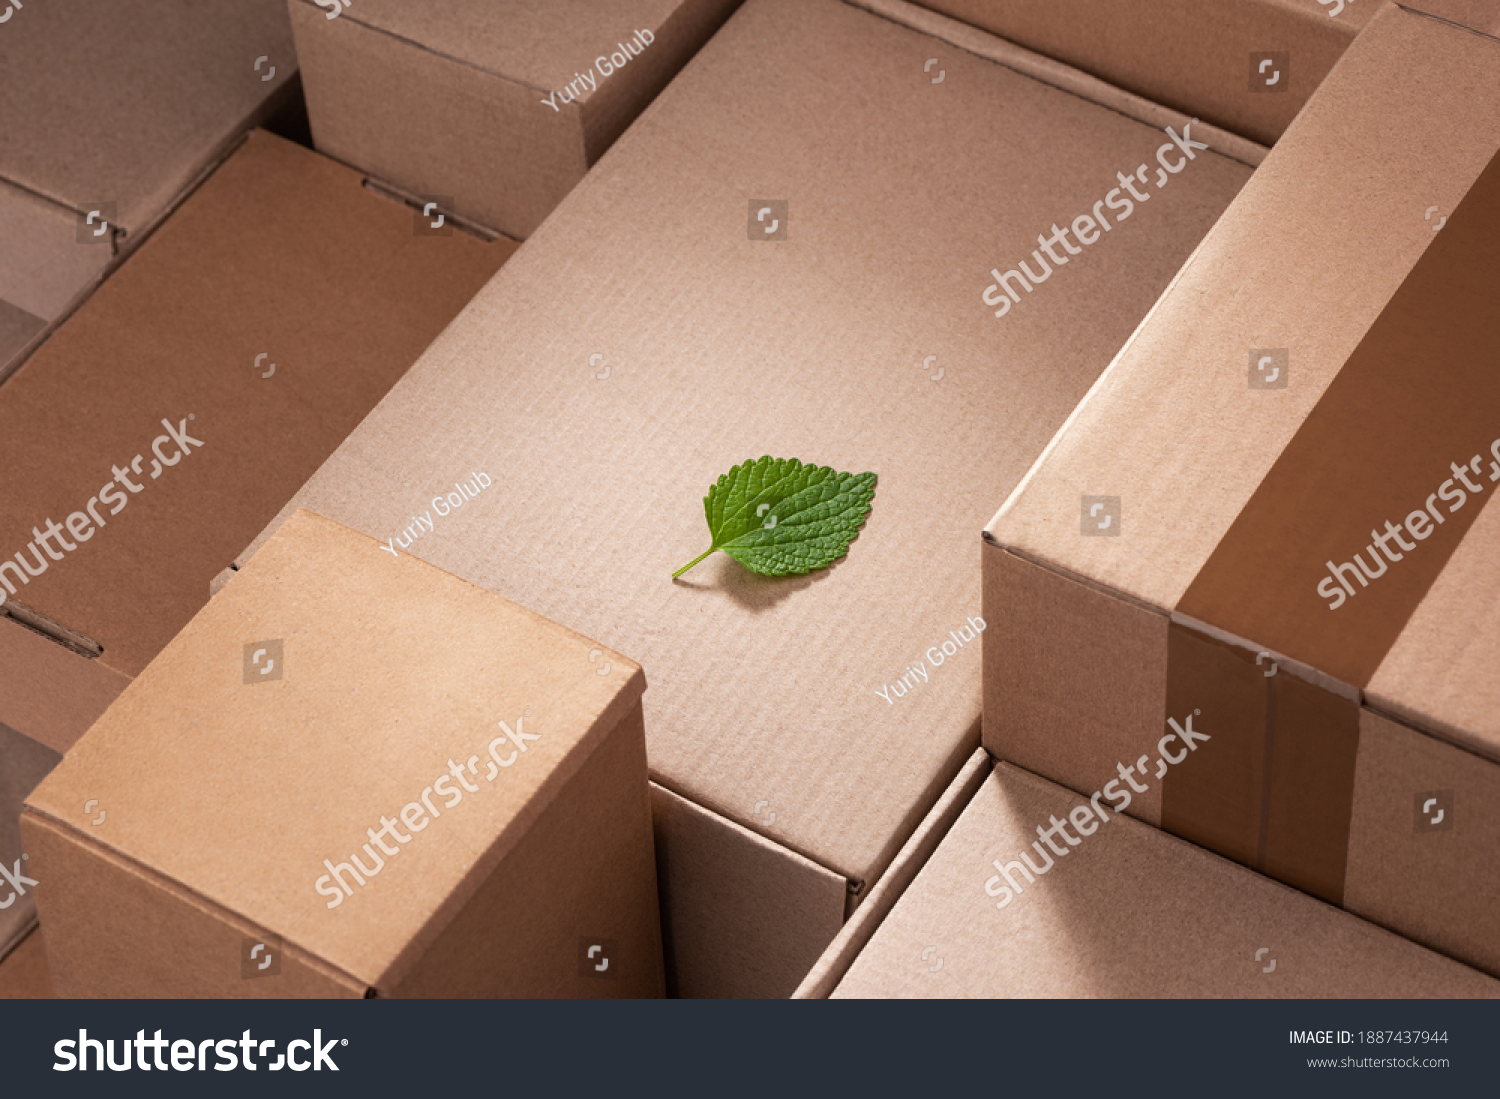 Fresh green leaf laying between cardboard boxes. Shipping deliveries, global trade and environmental impact. #1887437944